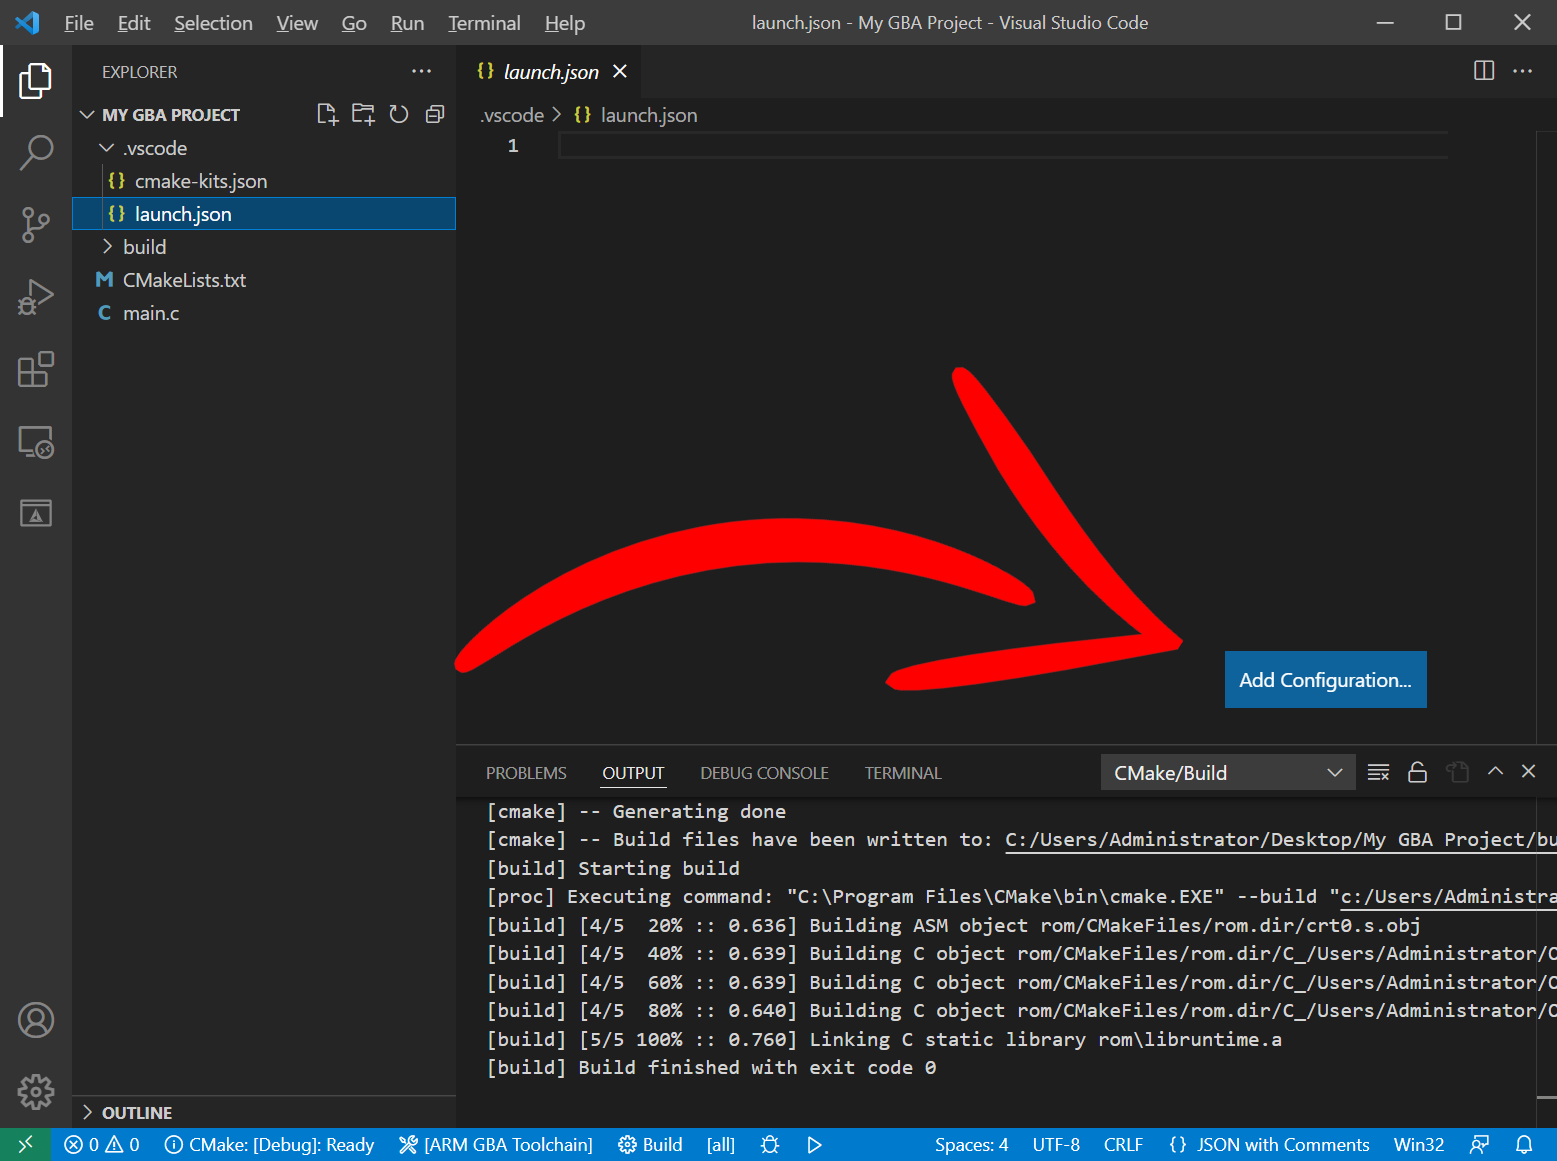 VSCode with launch.json selected and a red arrow pointing at Add Configuration